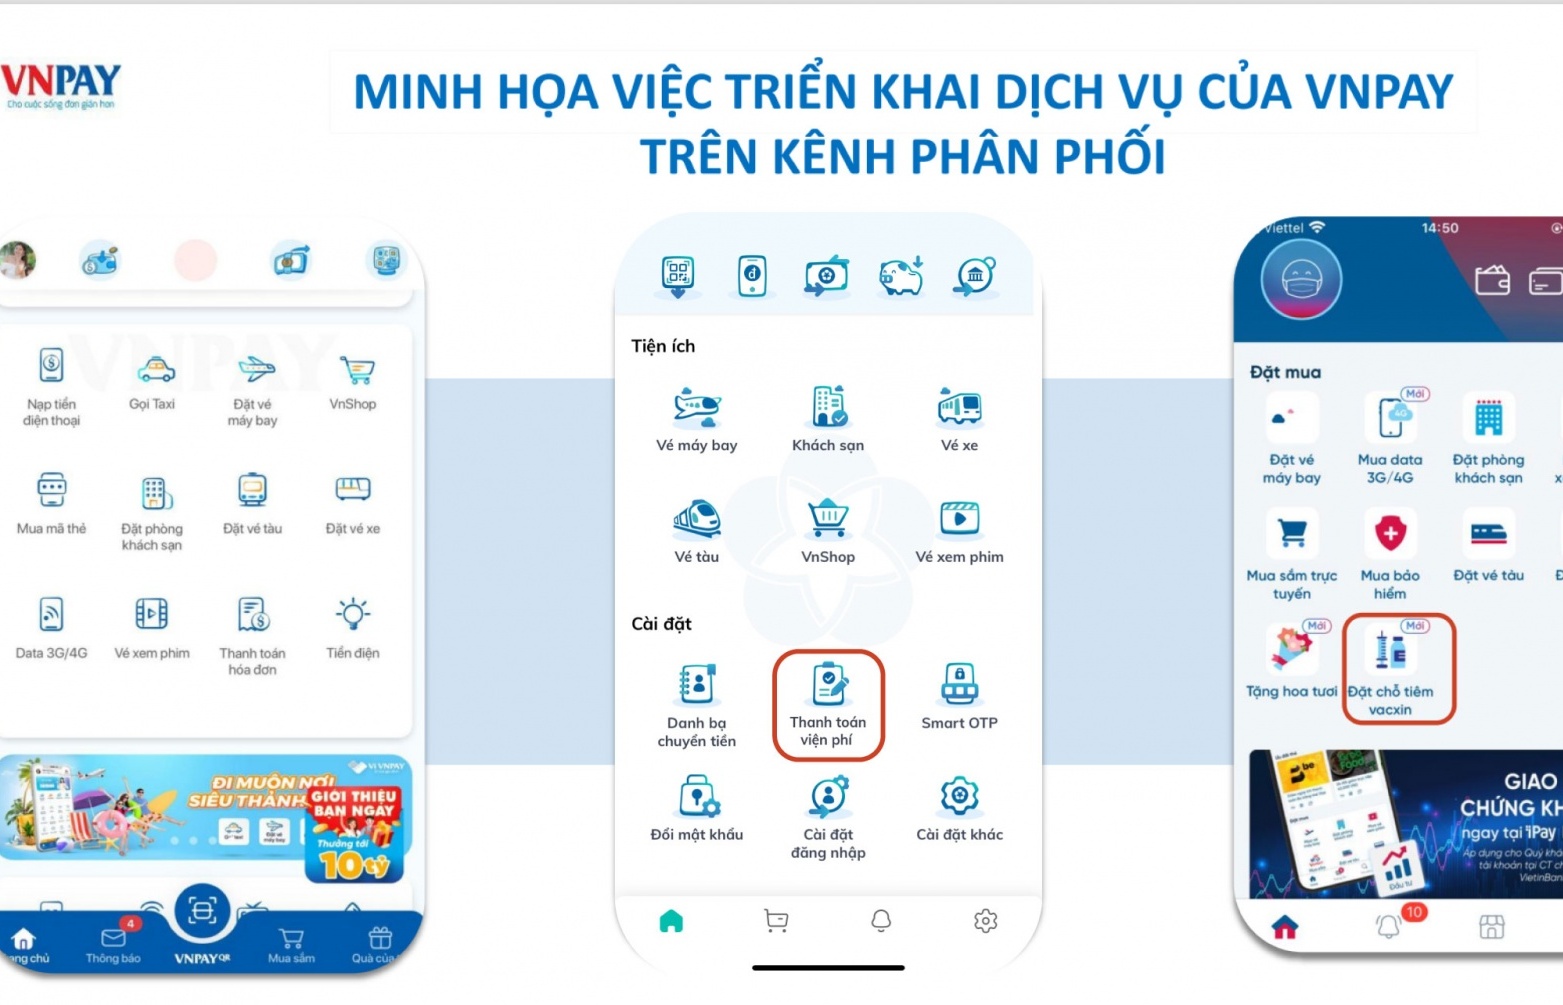 VNPAY promotes digital payments in healthcare sector